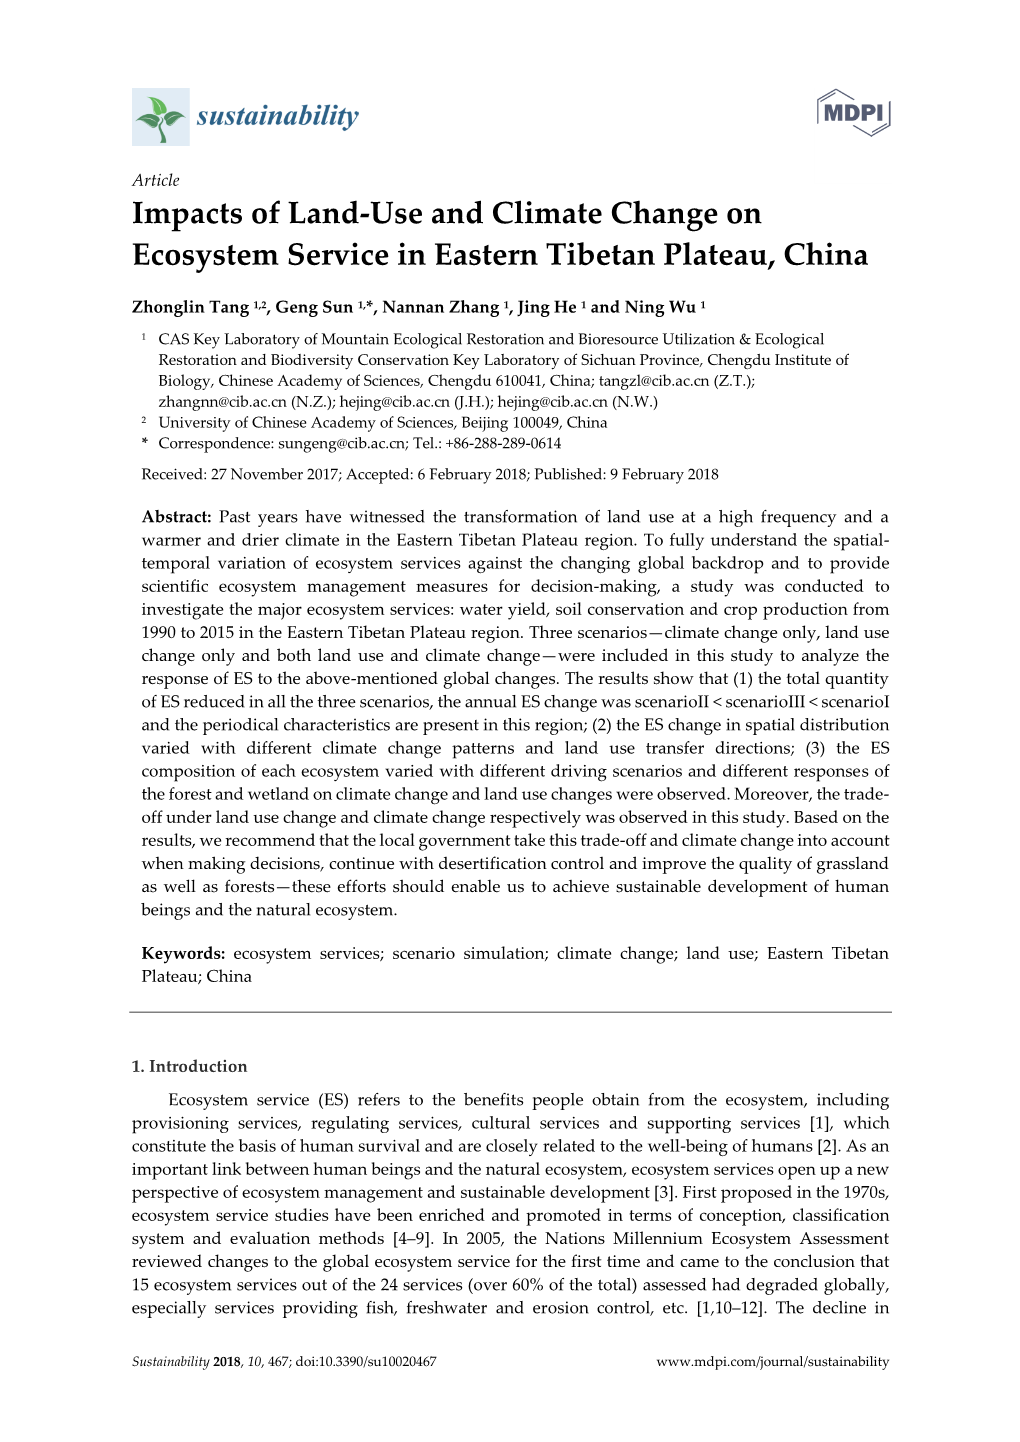 Article Impacts of Land-Use and Climate Change on Ecosystem Service in Eastern Tibetan Plateau, China